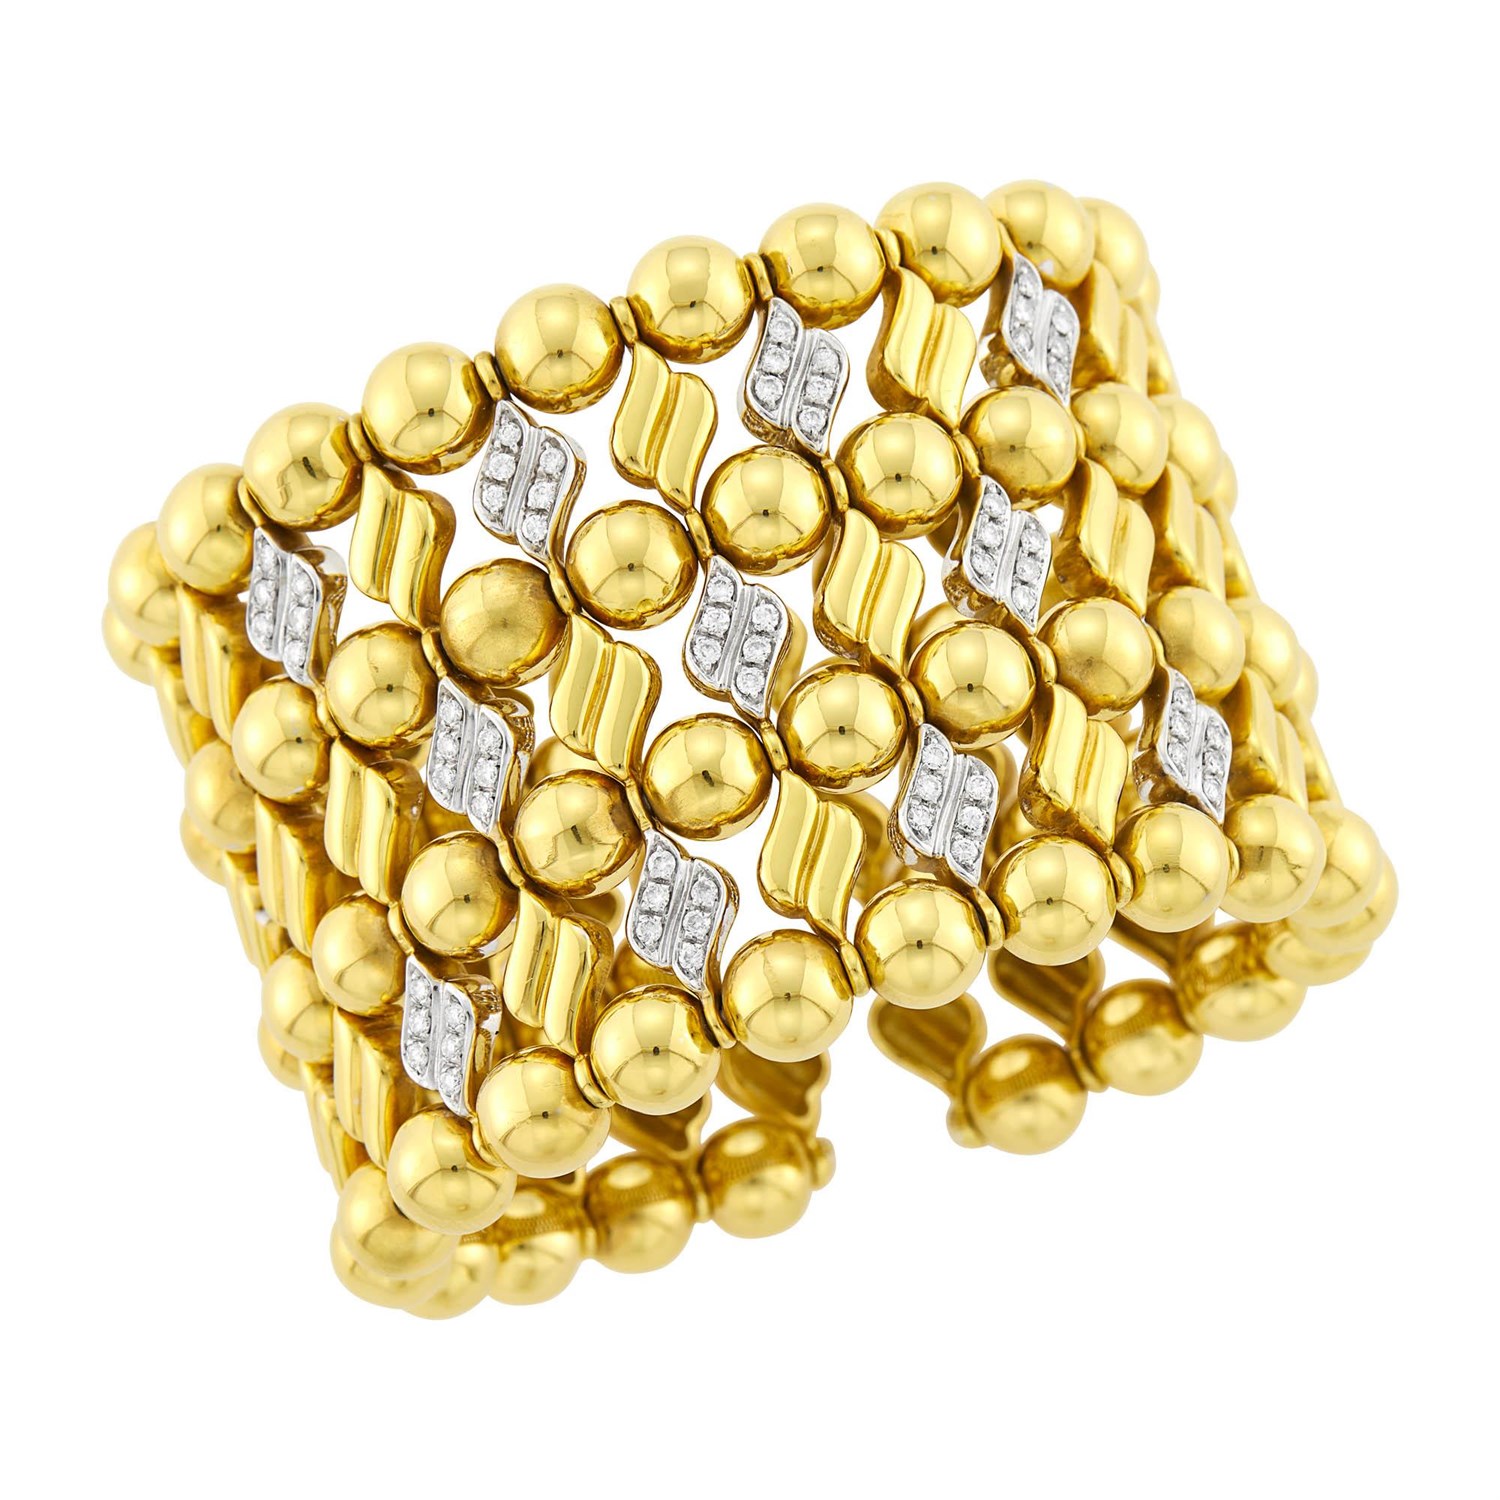 Lot 30 - Two-Color Gold and Diamond Cuff Bracelet